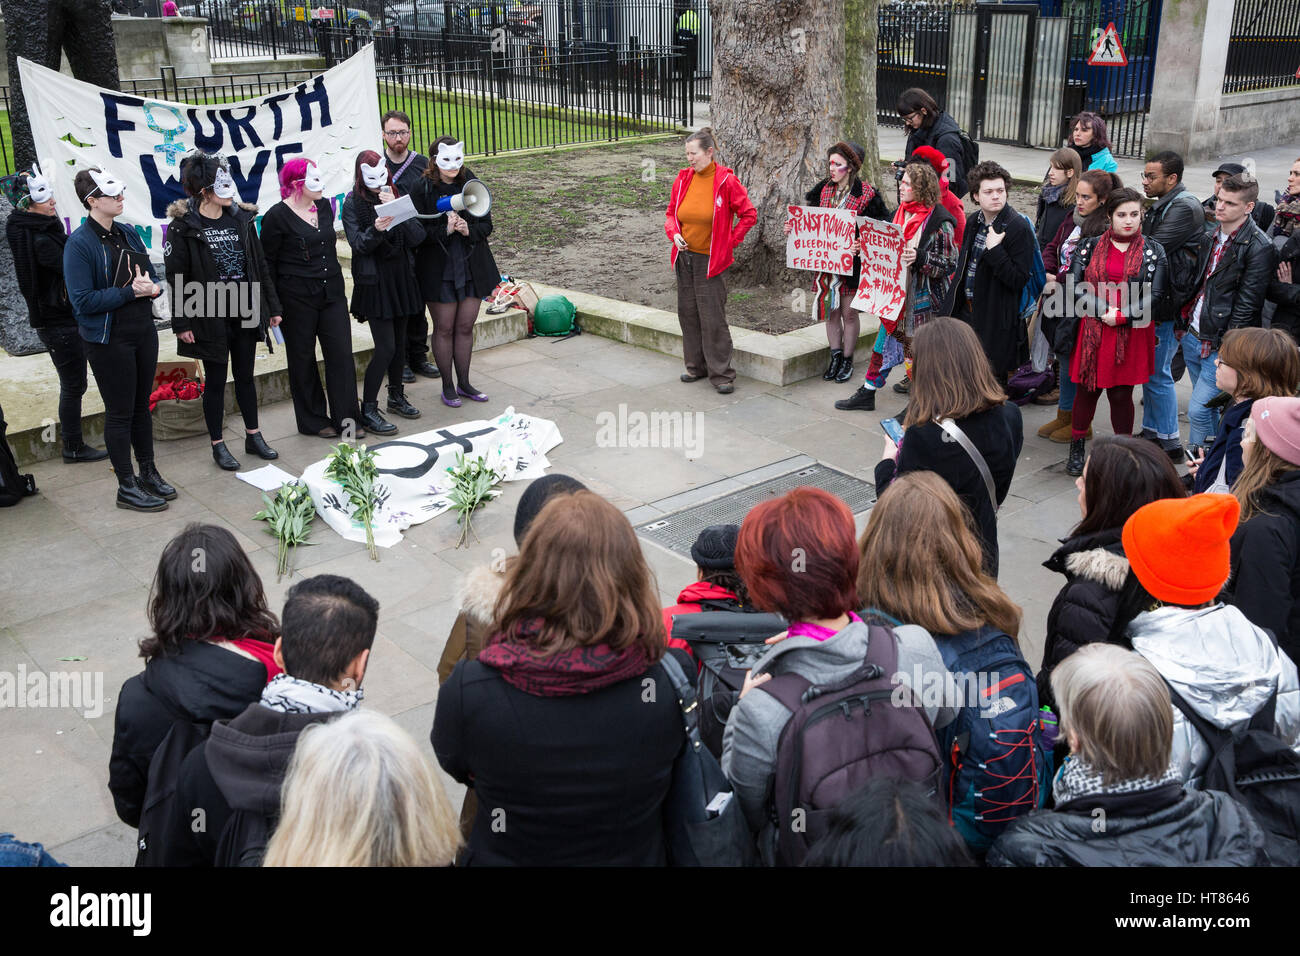 London, UK. 8th March, 2017. Feminist activists from Fourth Wave protest outside Downing Street on International Women's Day to draw attention to the disproportionate impact on women of the Government's continuing programme of austerity cuts. Credit: Mark Kerrison/Alamy Live News Stock Photo